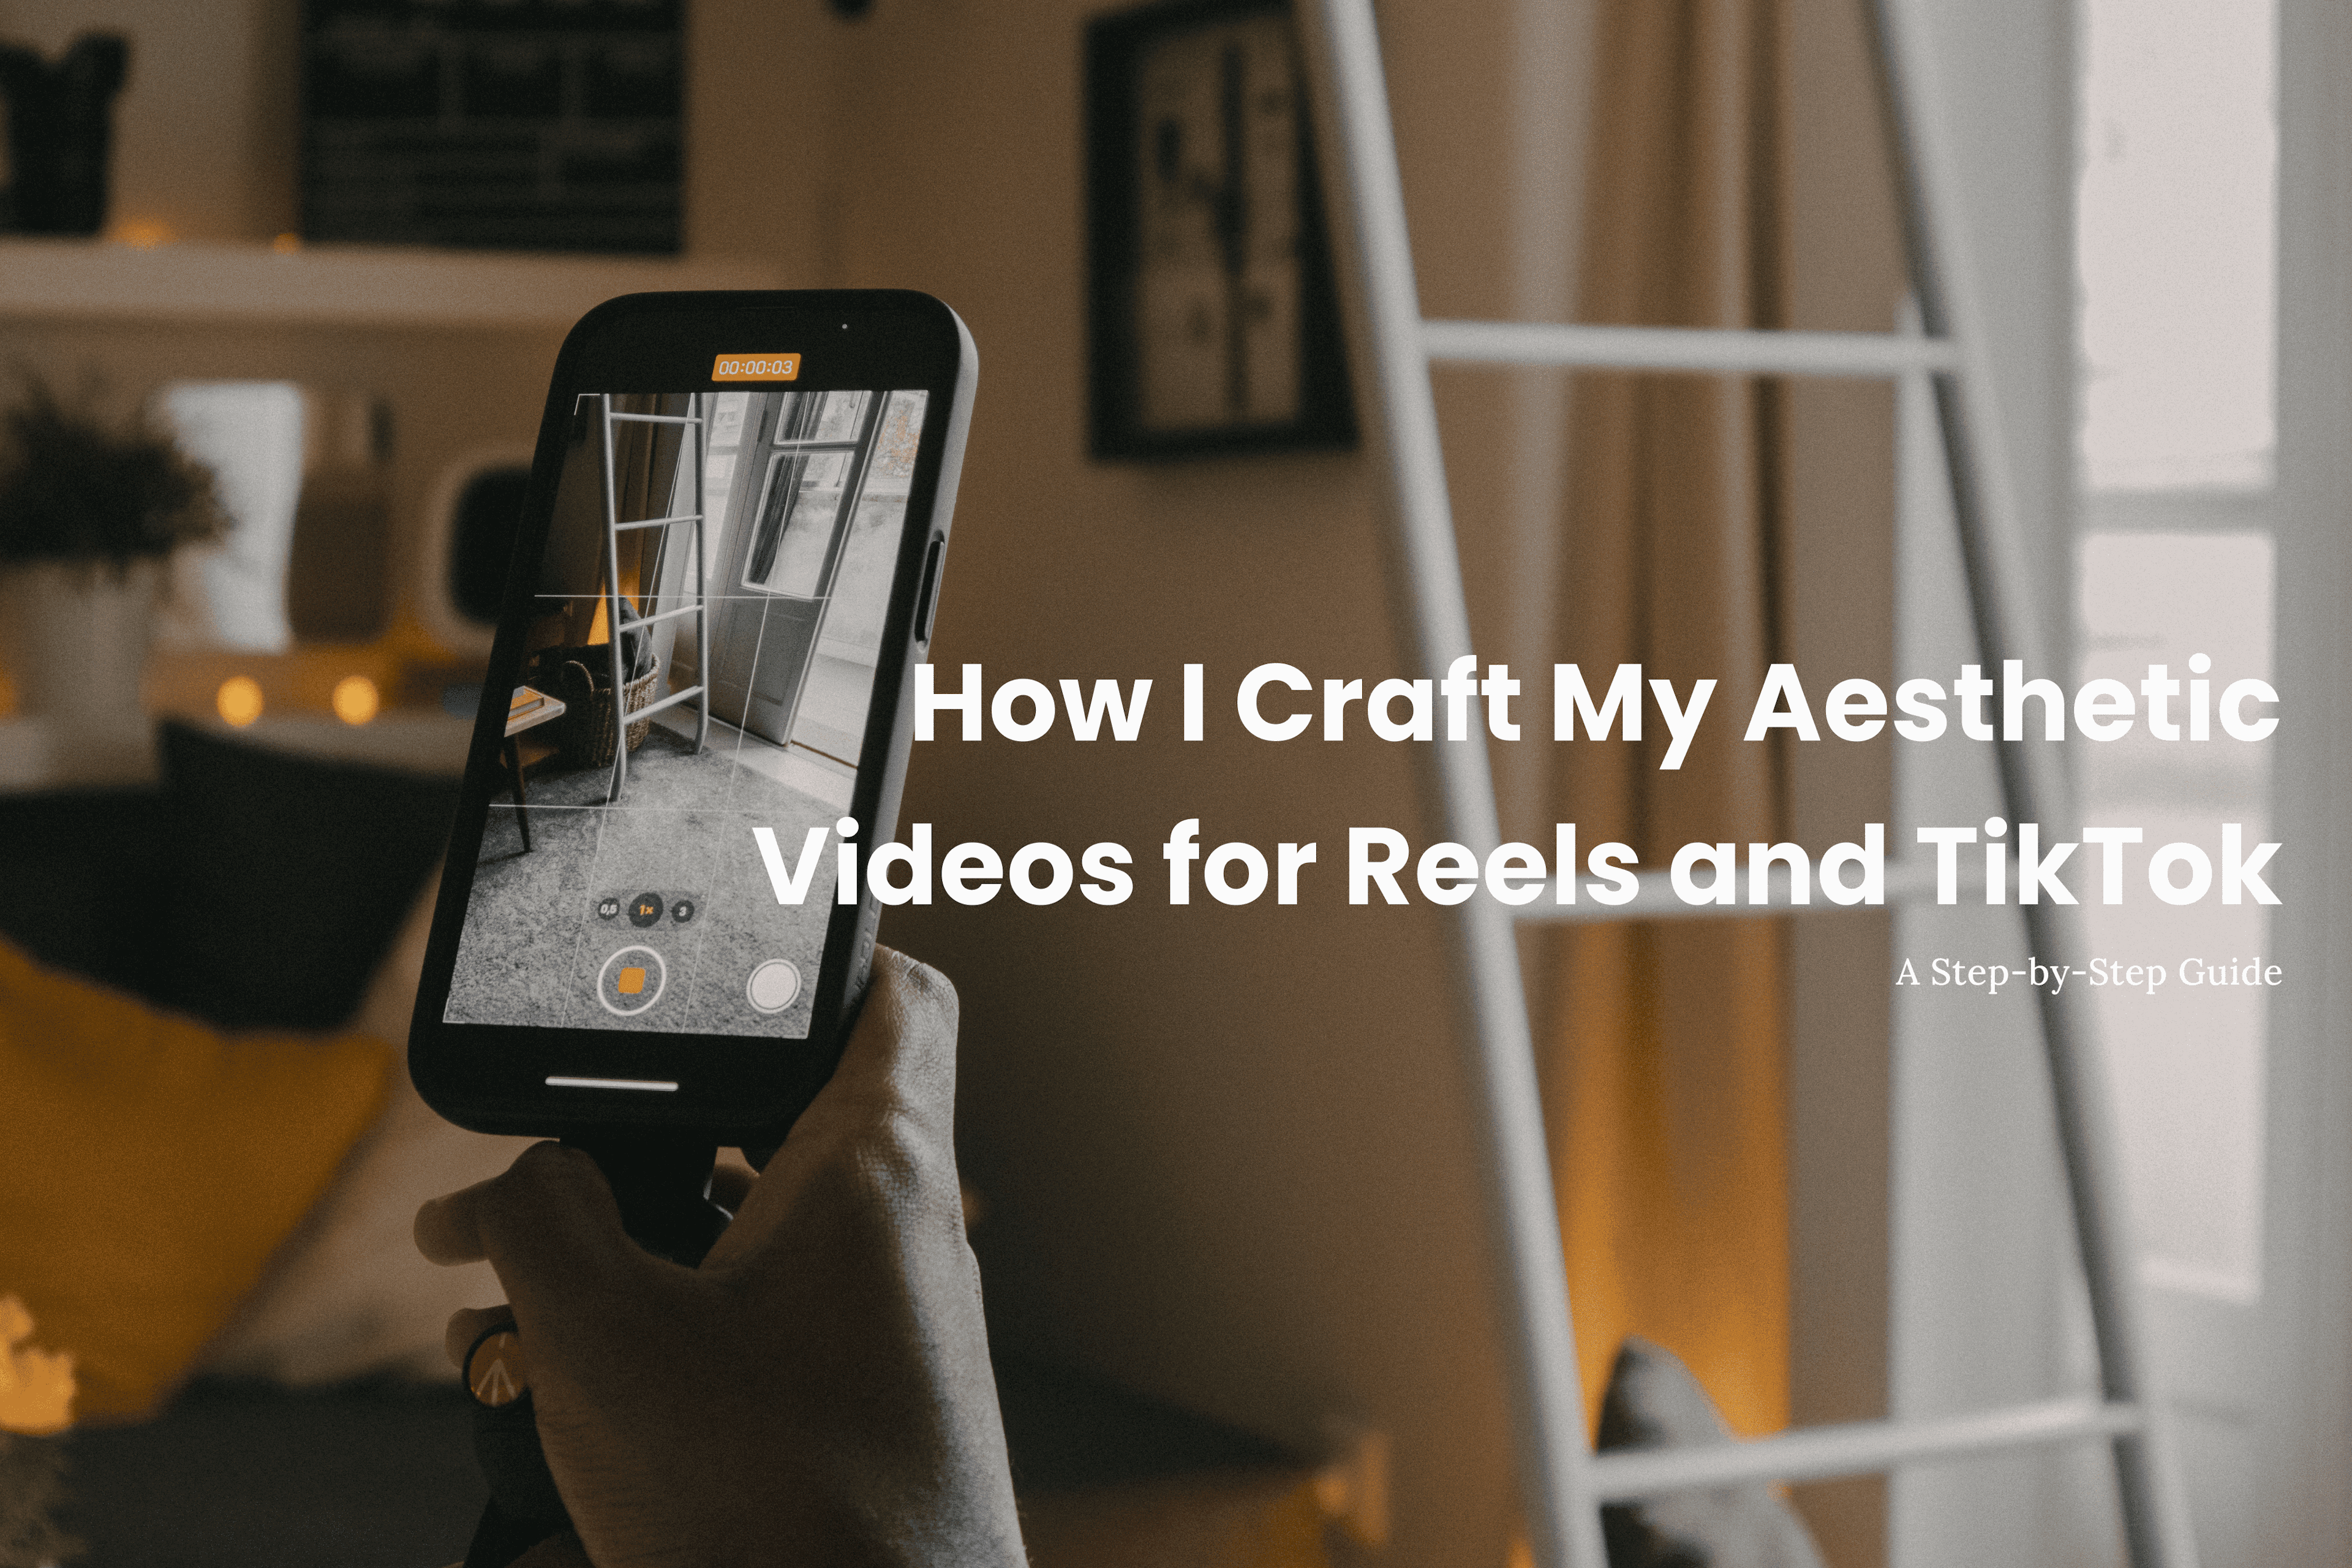 How I Craft My Aesthetic Videos for Reels and TikTok: A Step-by-Step Guide